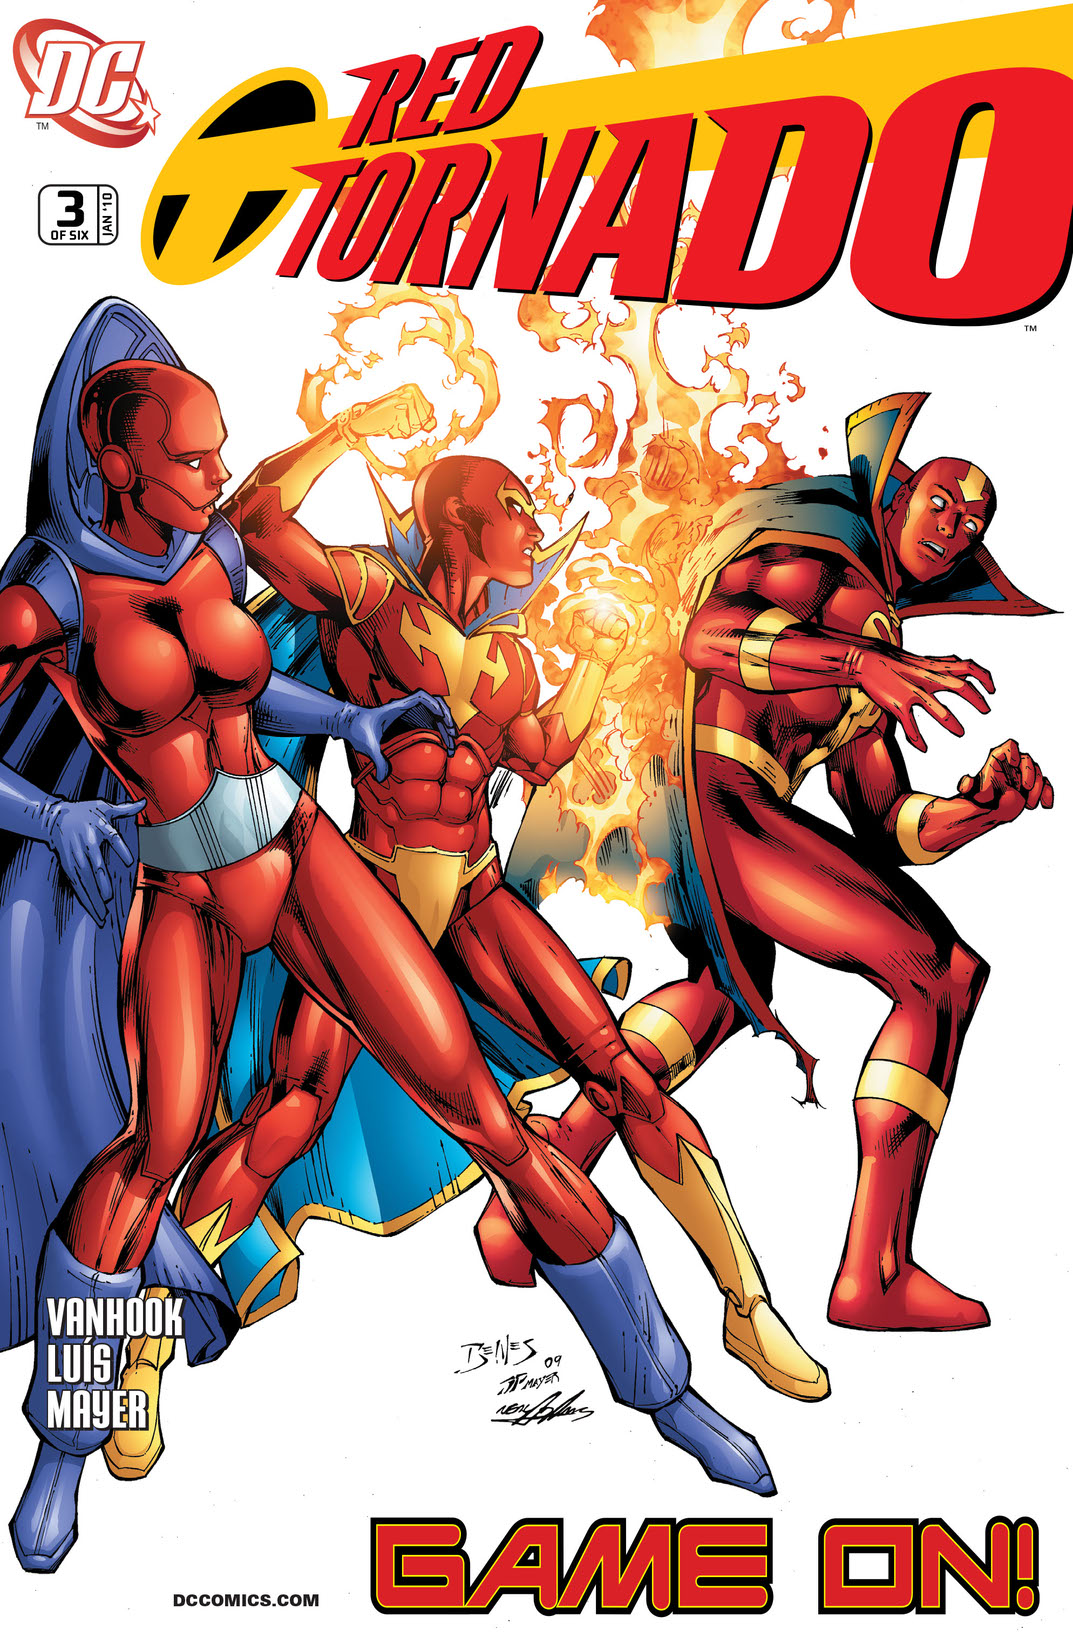 Red Tornado (2009-) #3 preview images